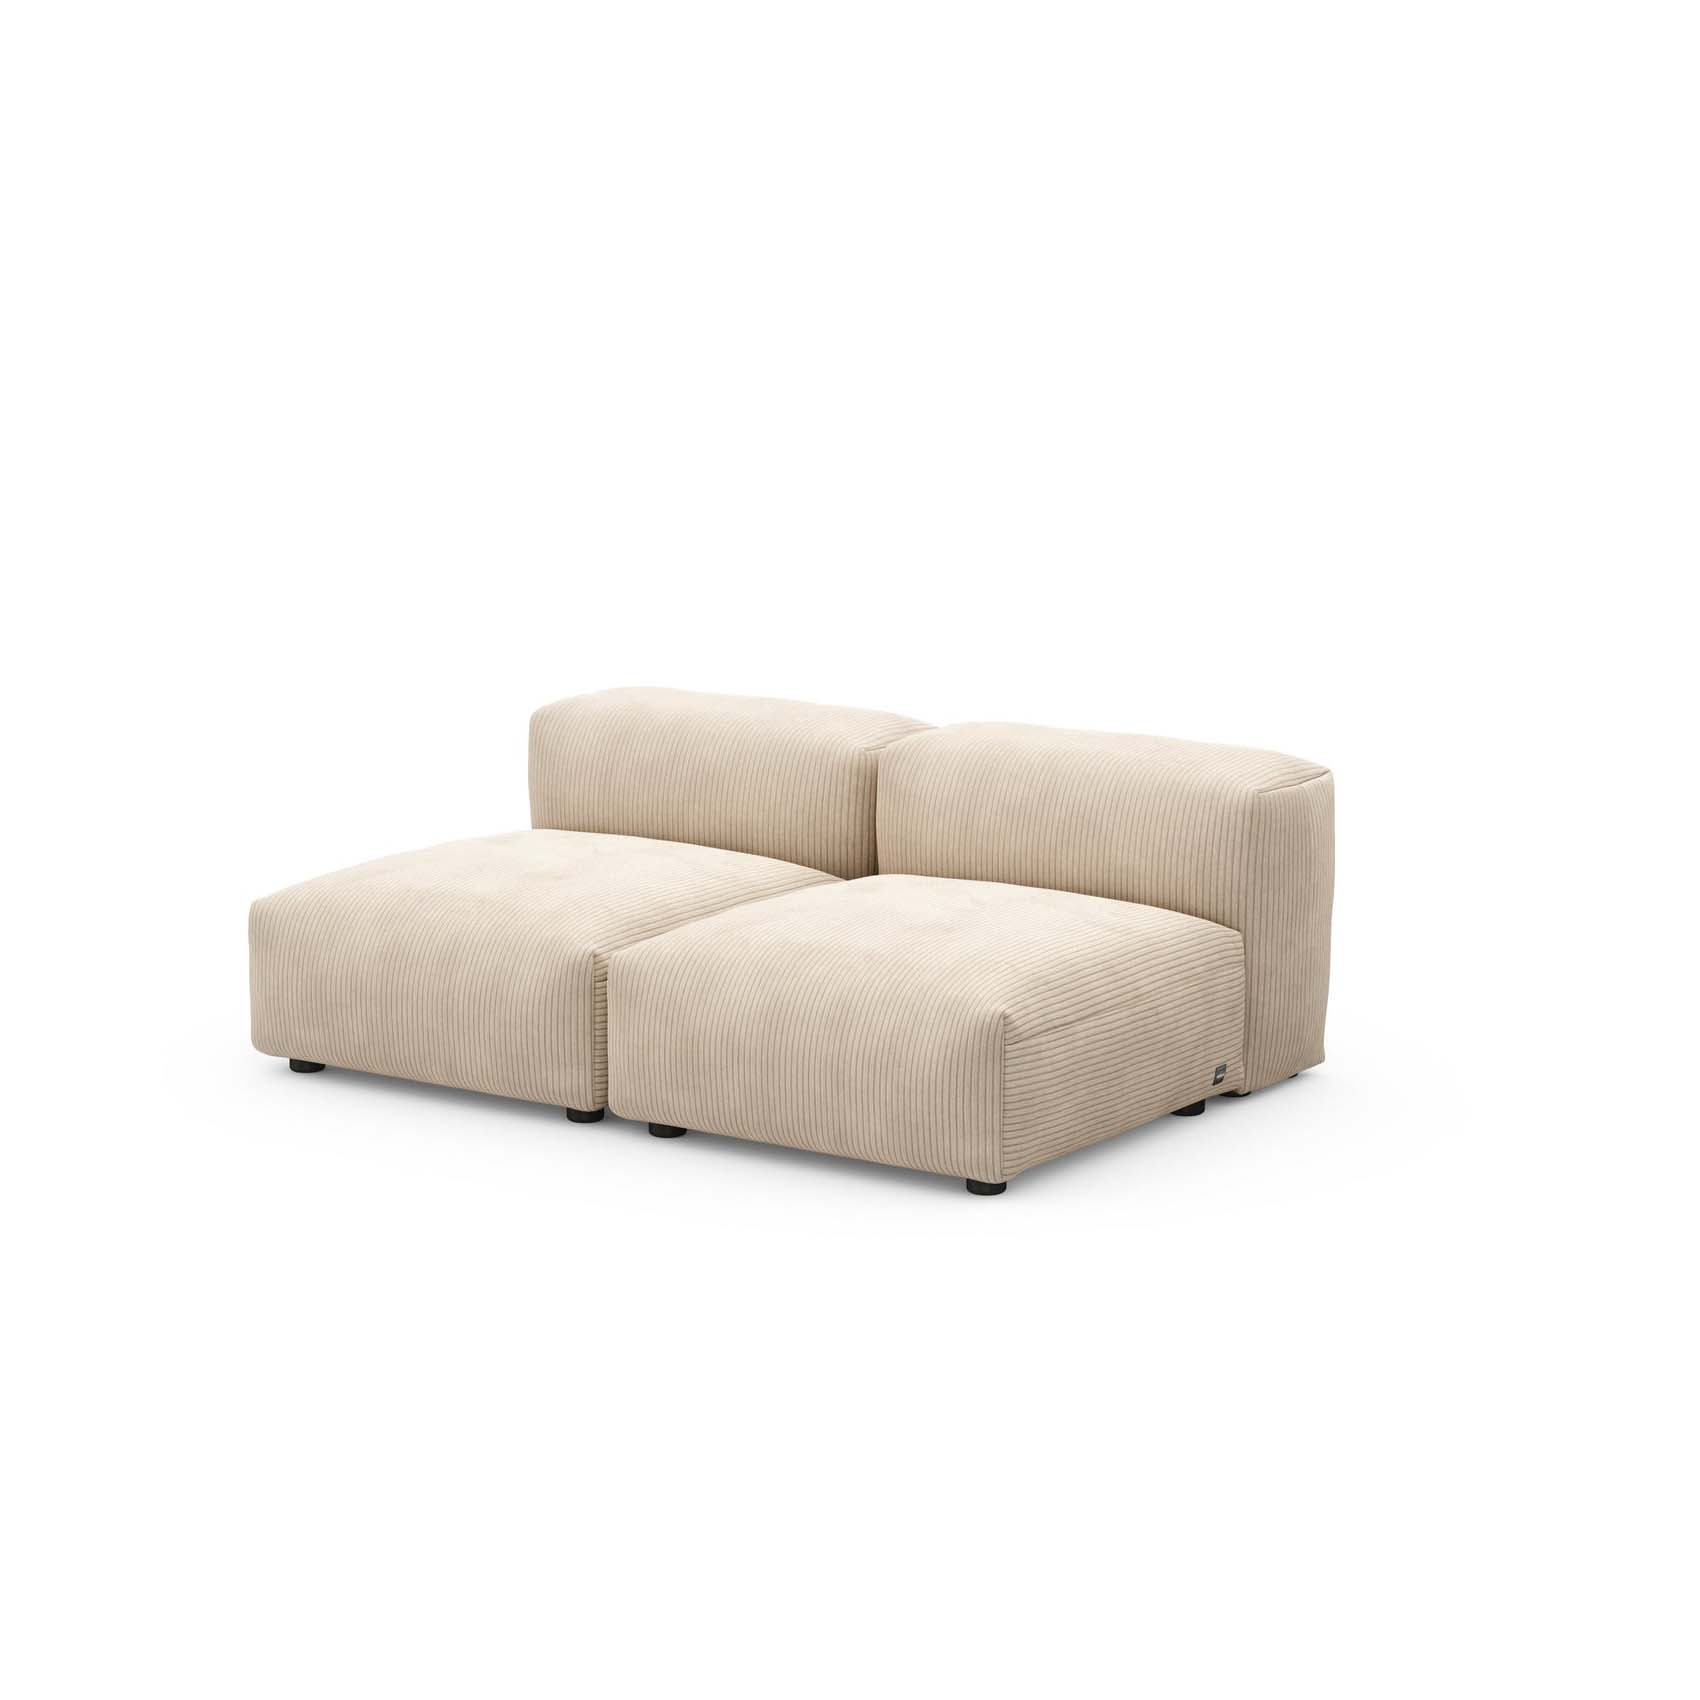 Two Seat Lounge Sofa S Cord Velours Sand